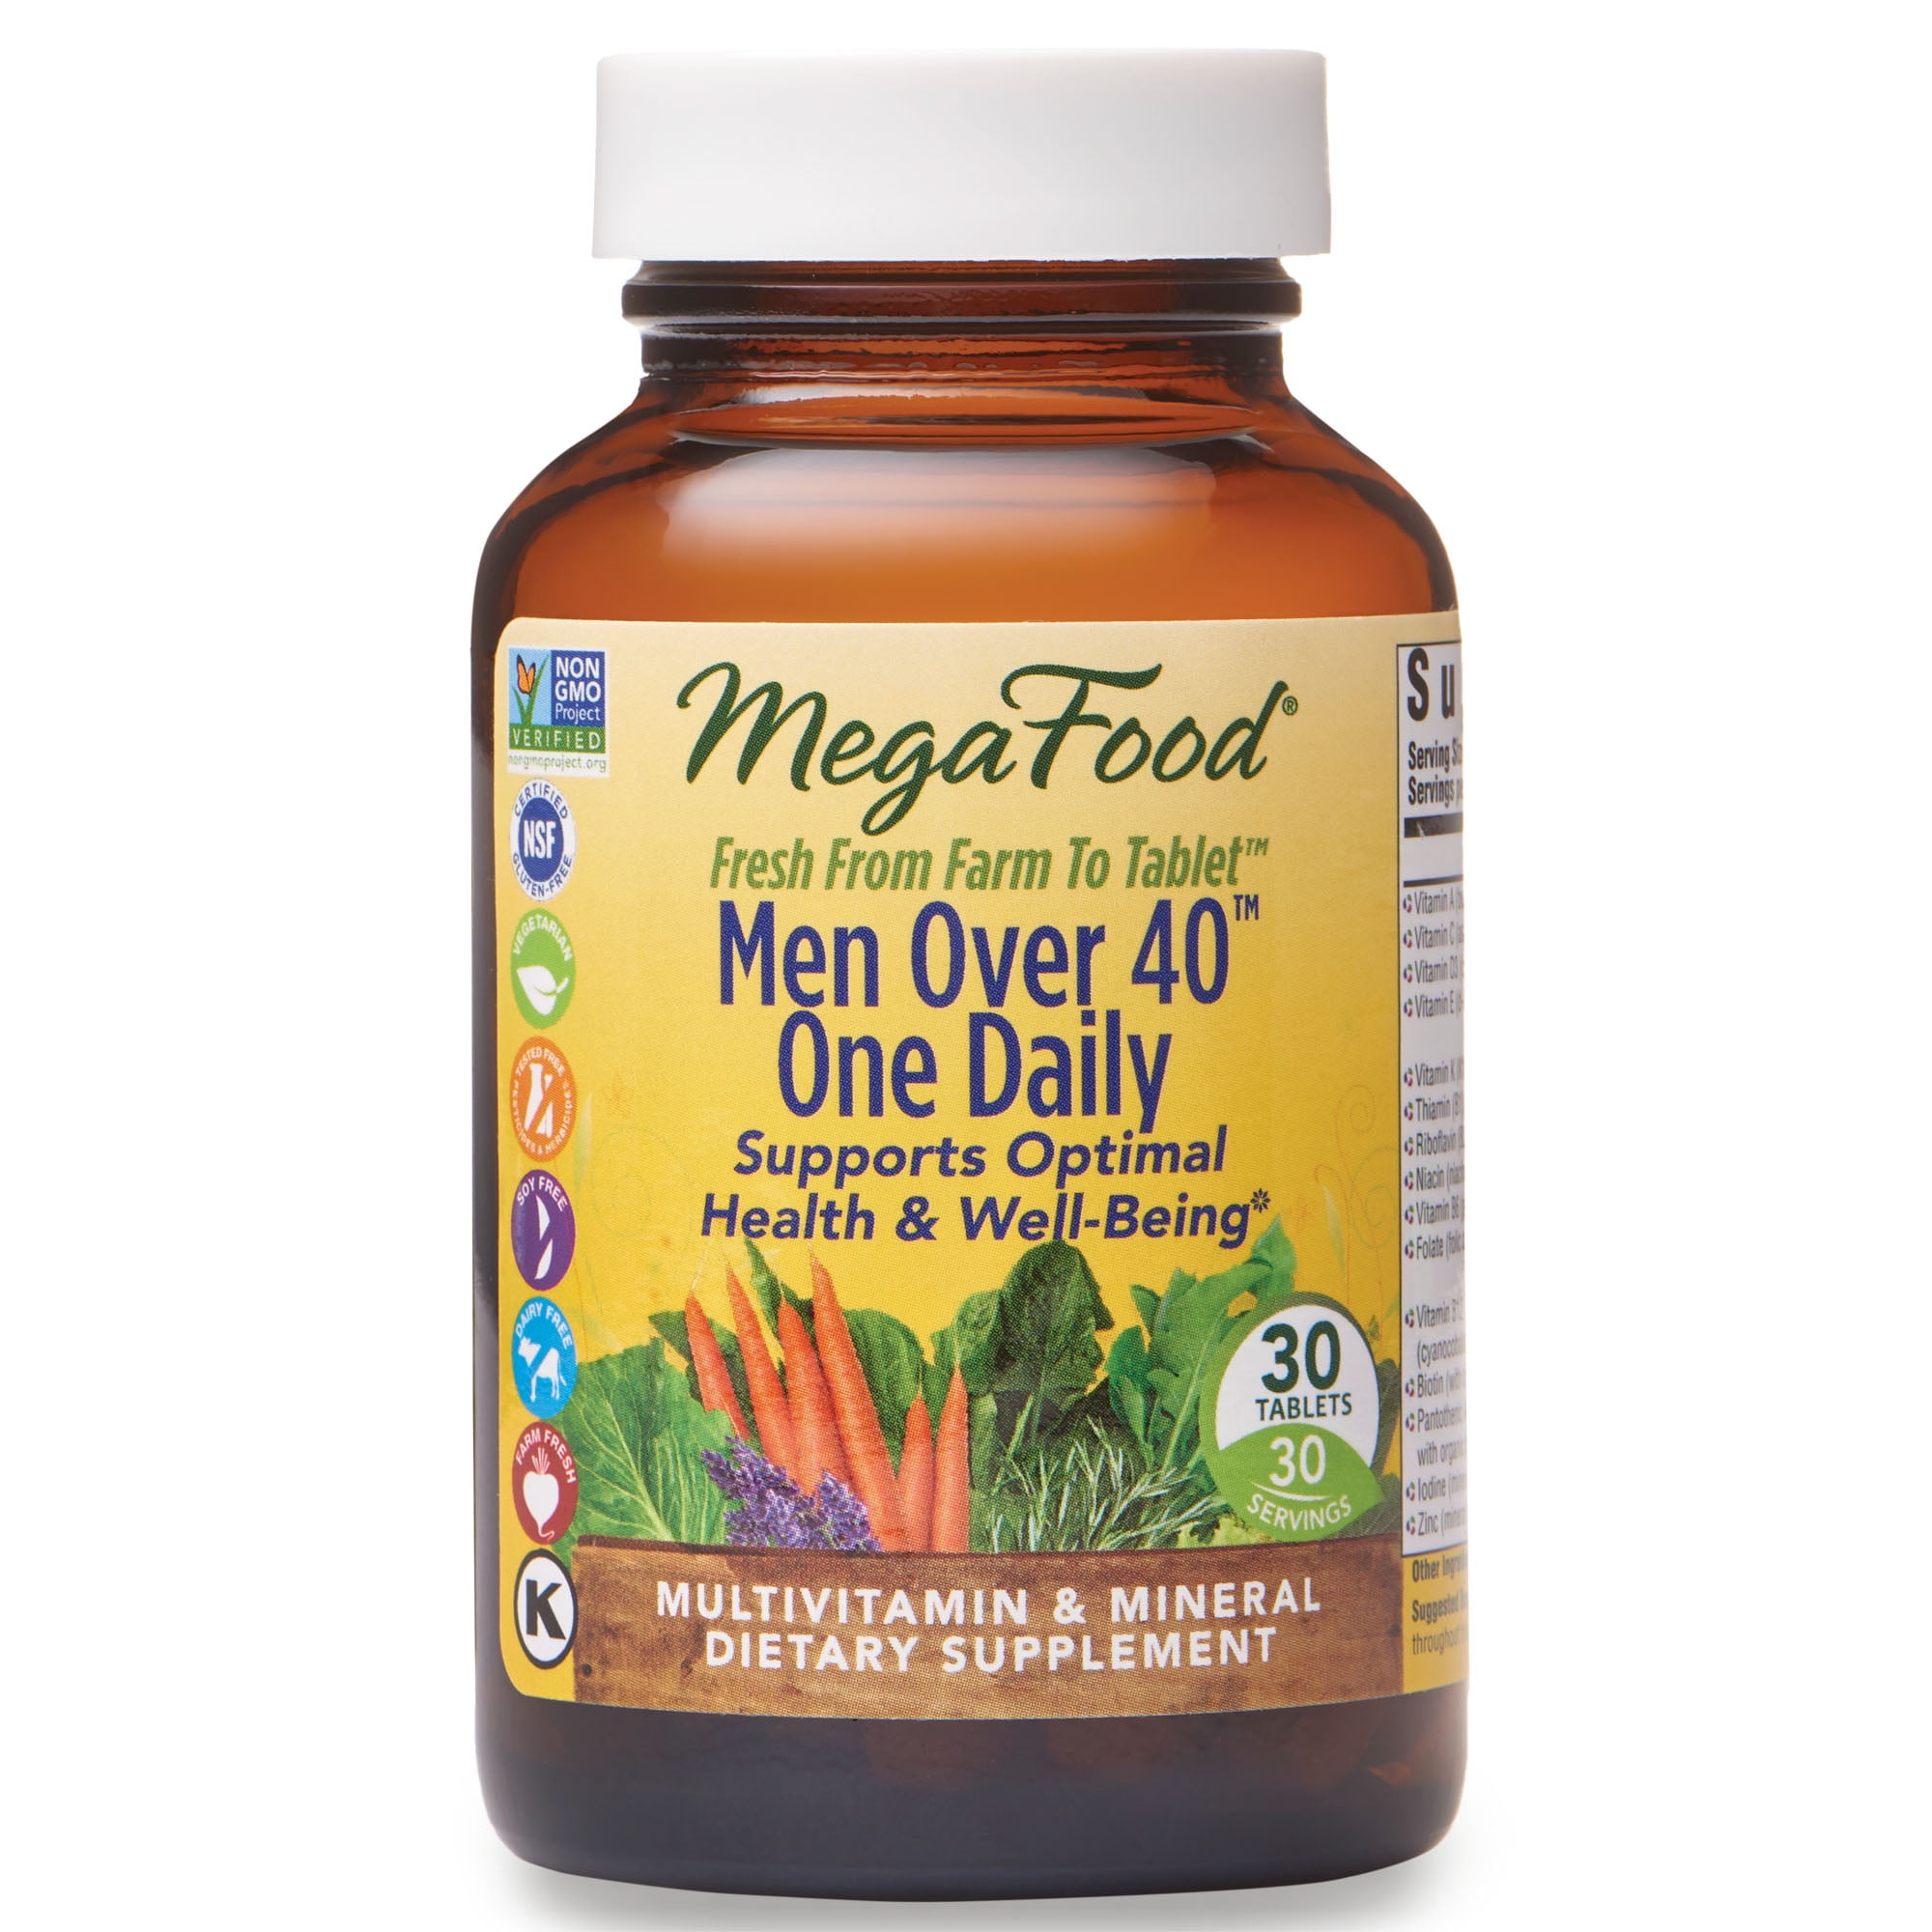 Megafood Men Over 40 One Daily Daily Multivitamin And Mineral Dietary Supplement With Vitamins B D And Zinc Non Gmo Vegetarian 30 Tablets 30 Servings Walmart Com Walmart Com